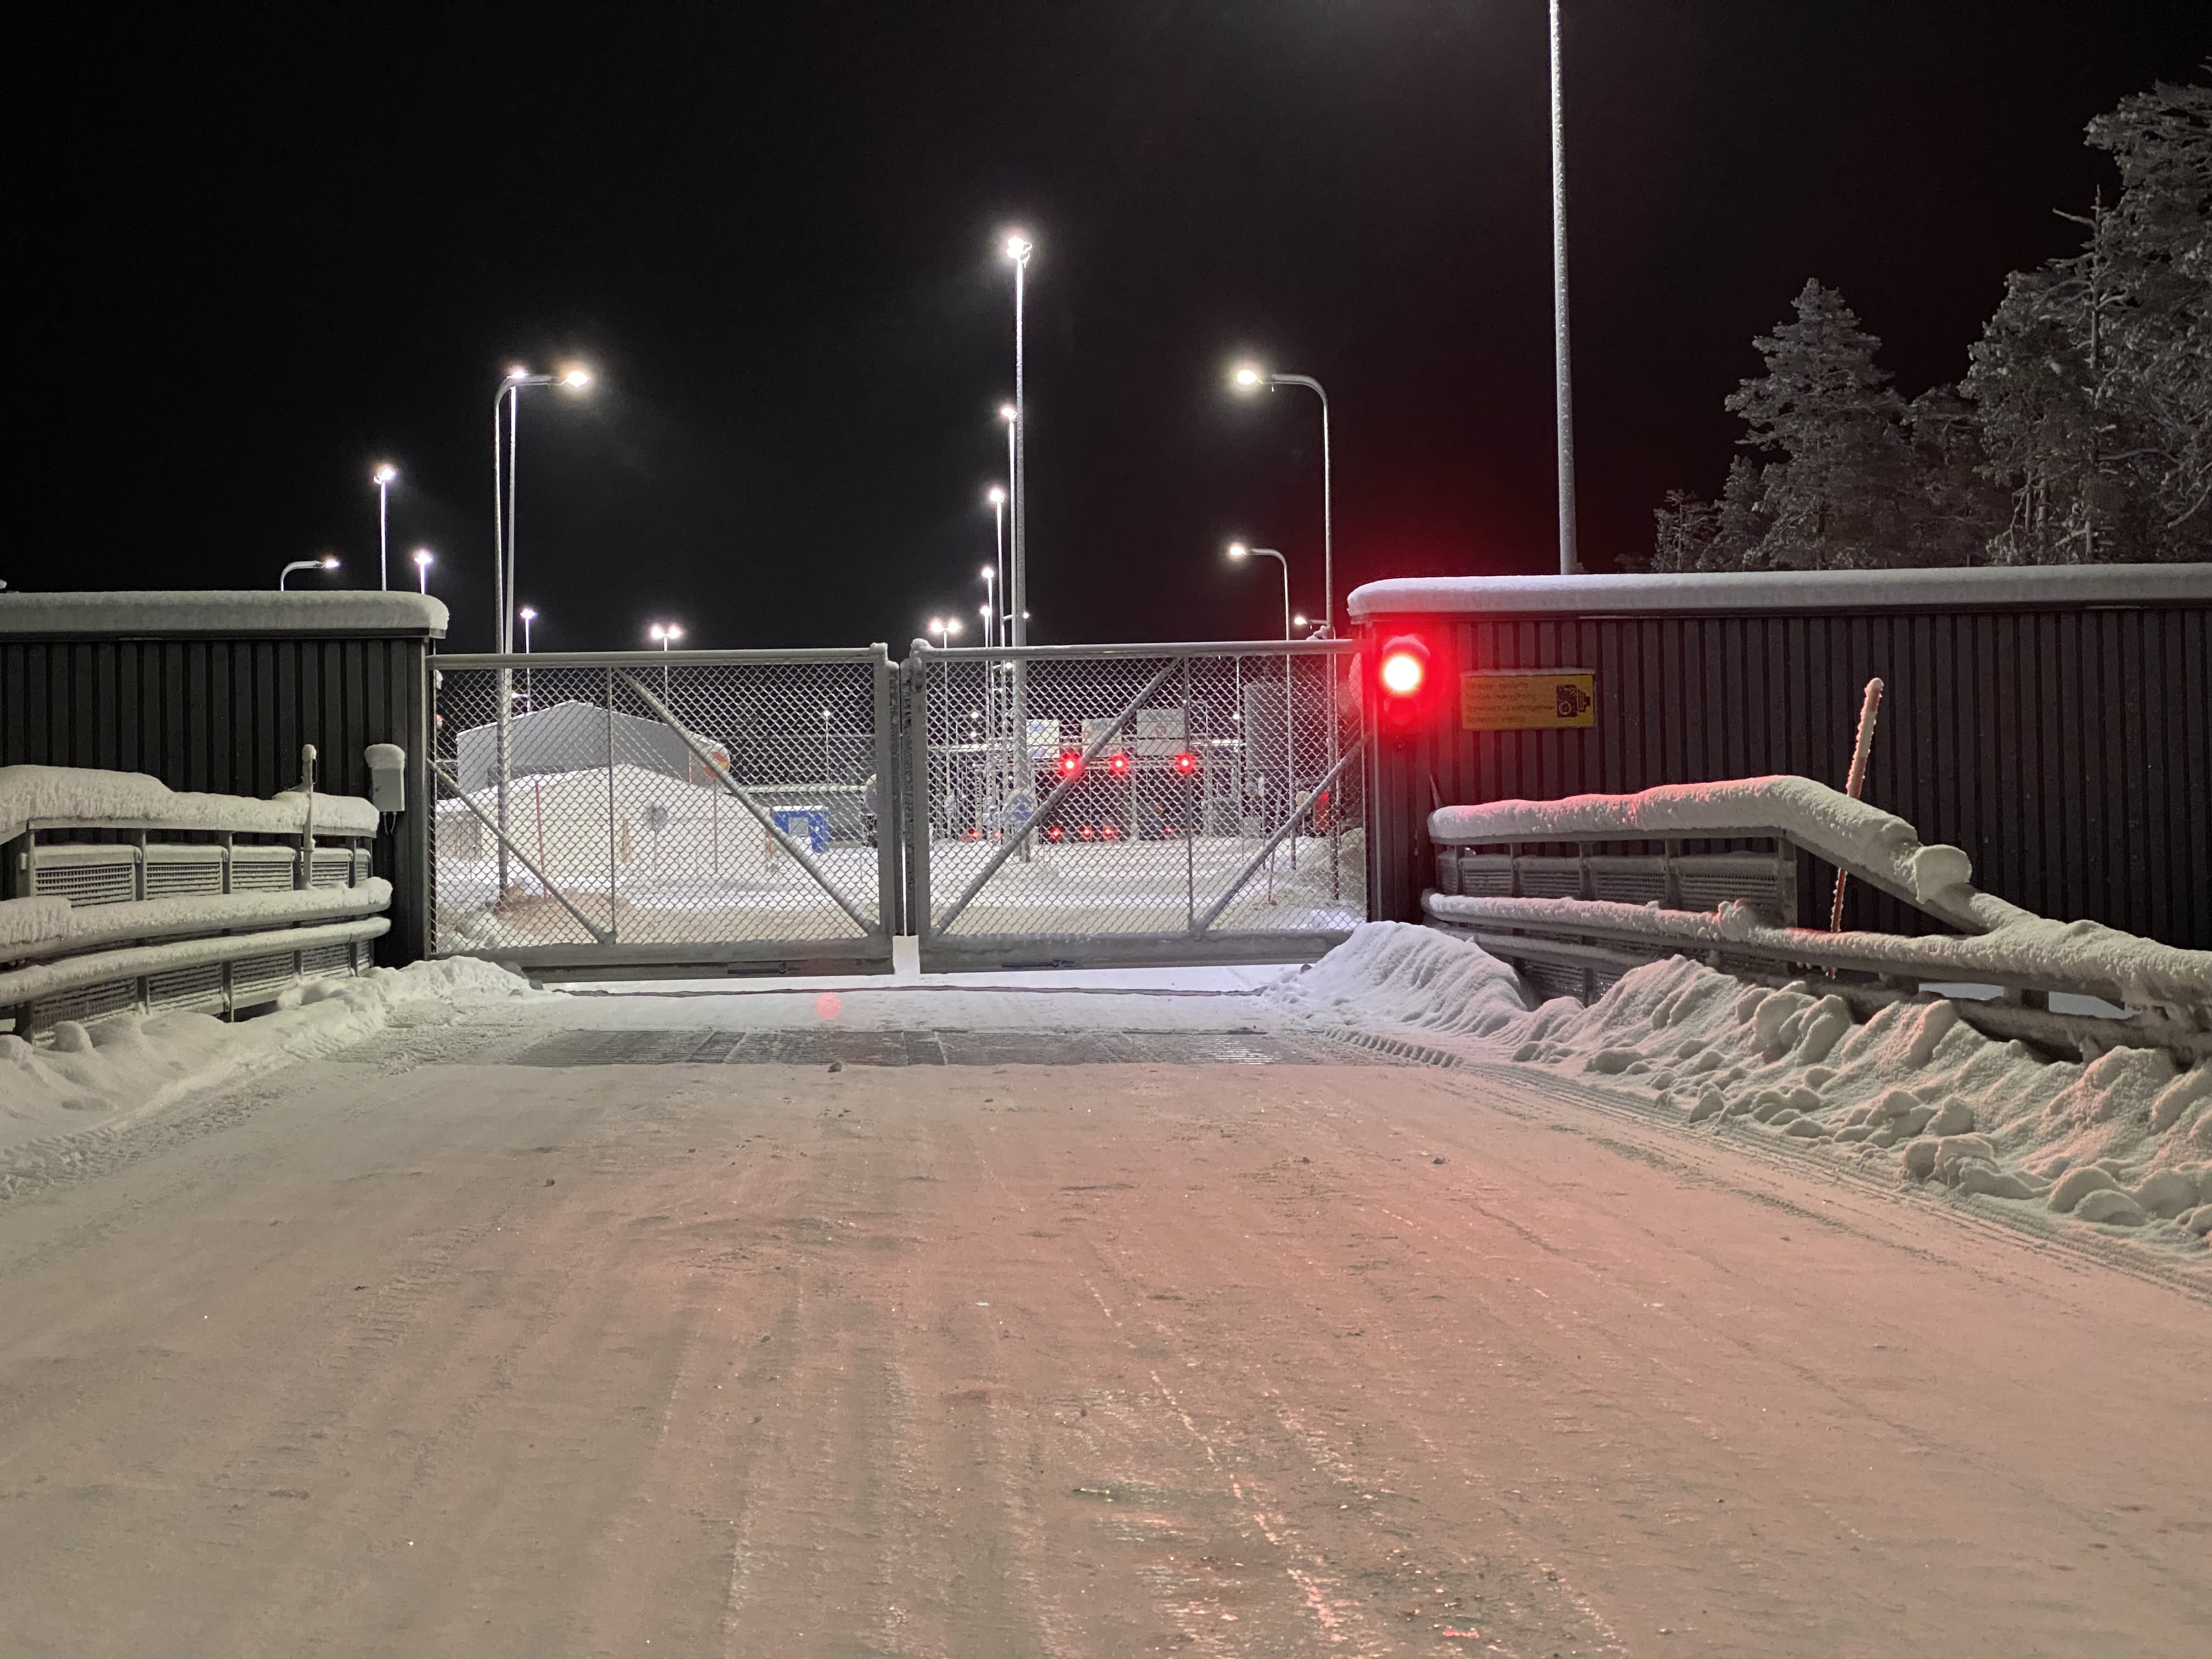 Finland’s last eastern border crossing will close on Wednesday afternoon